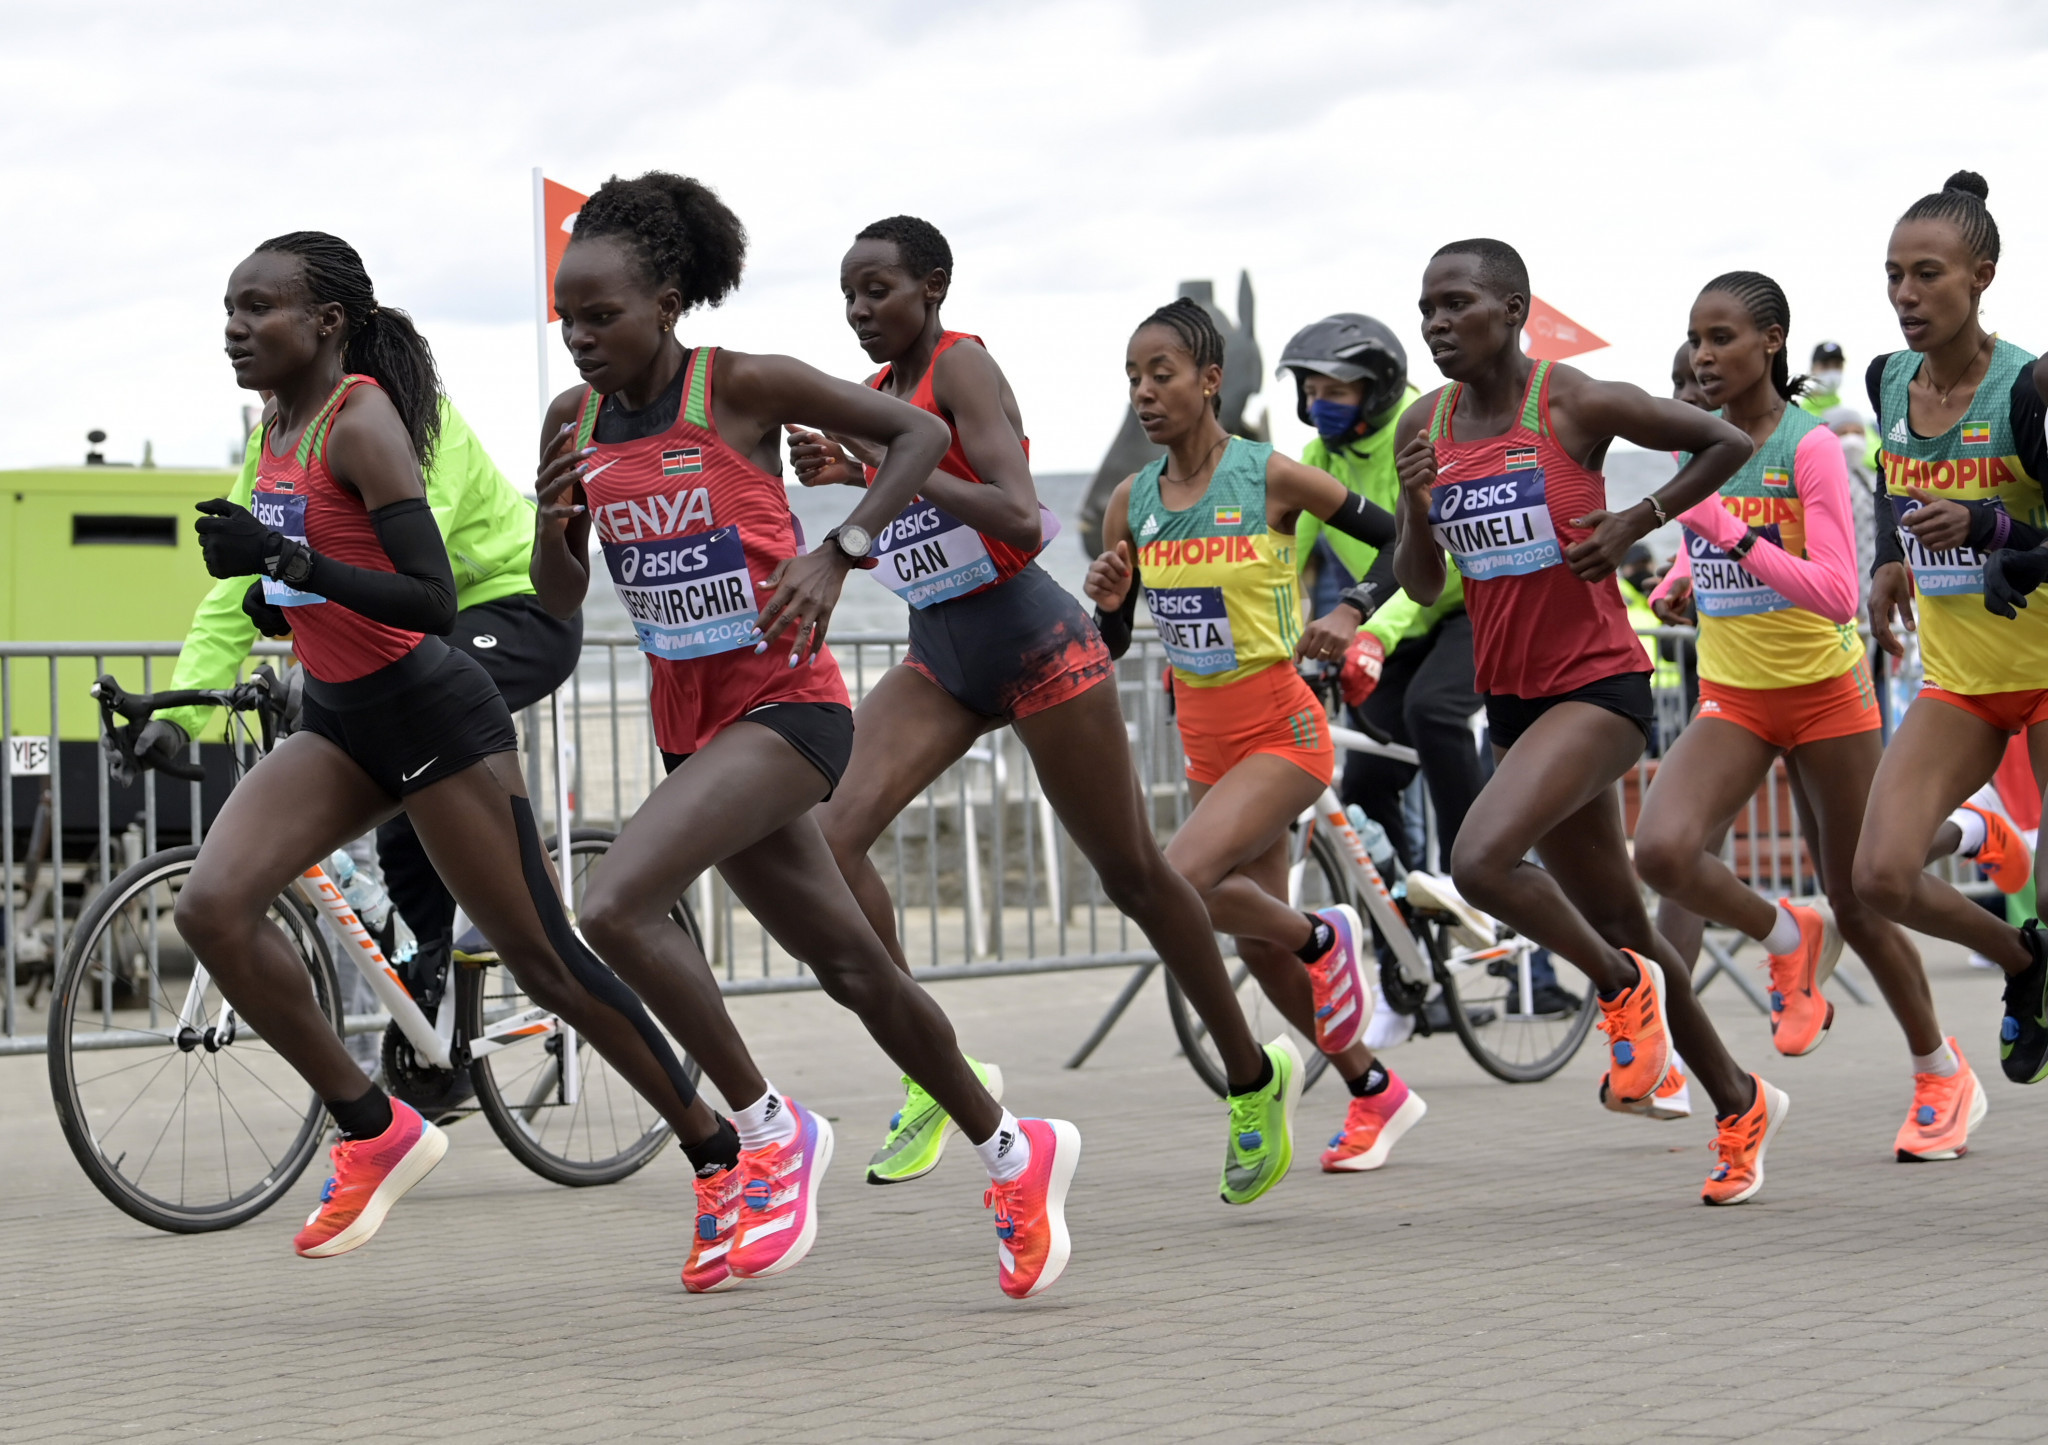 Falls punctuated a dramatic women's race ©World Athletics